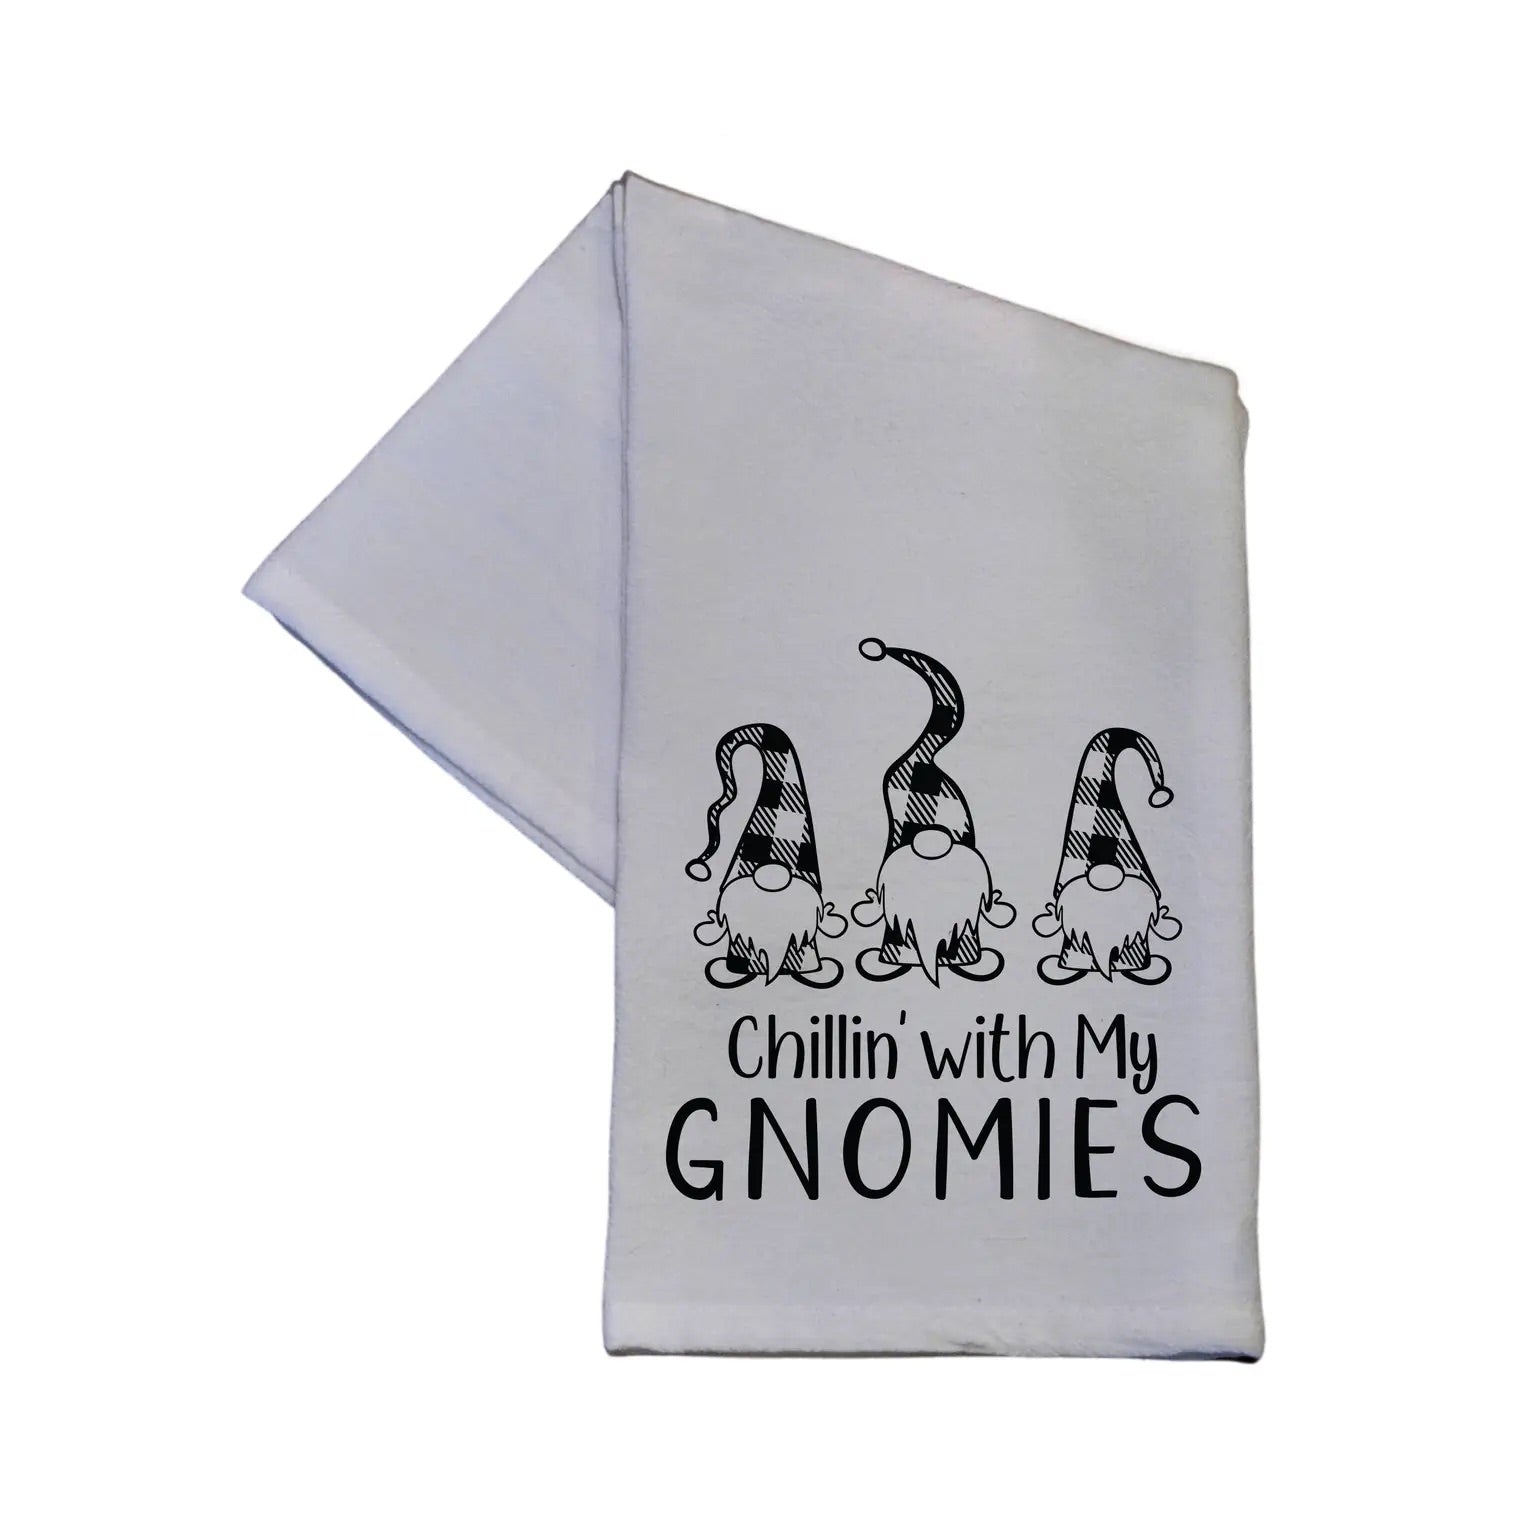 Chillin with my Gnomies Towel